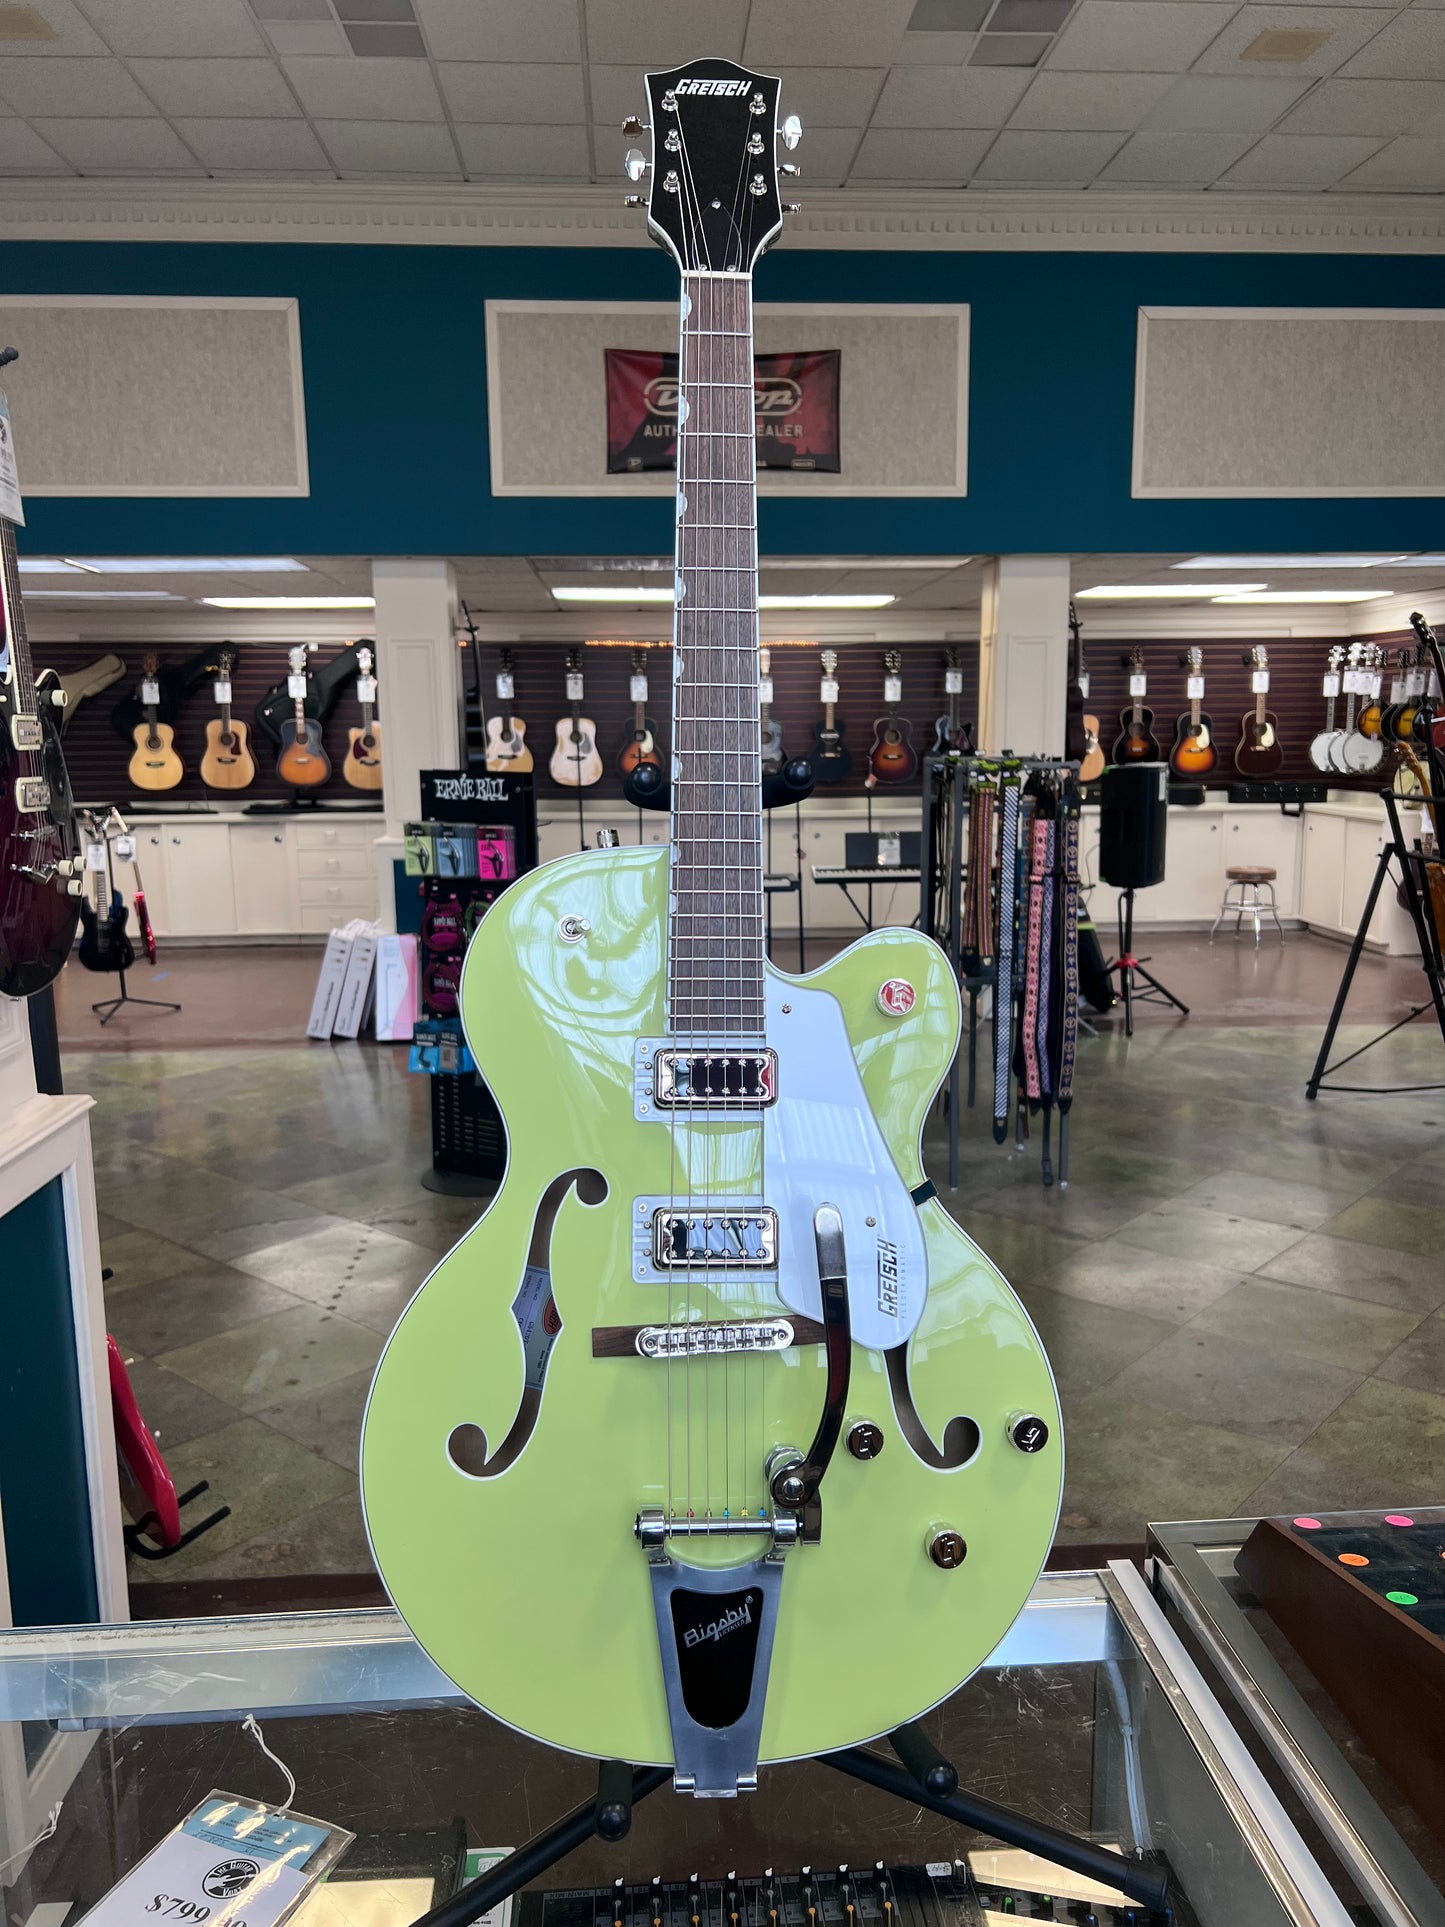 Gretsch 5420T Two-Tone Anniversary Green Hollow Body